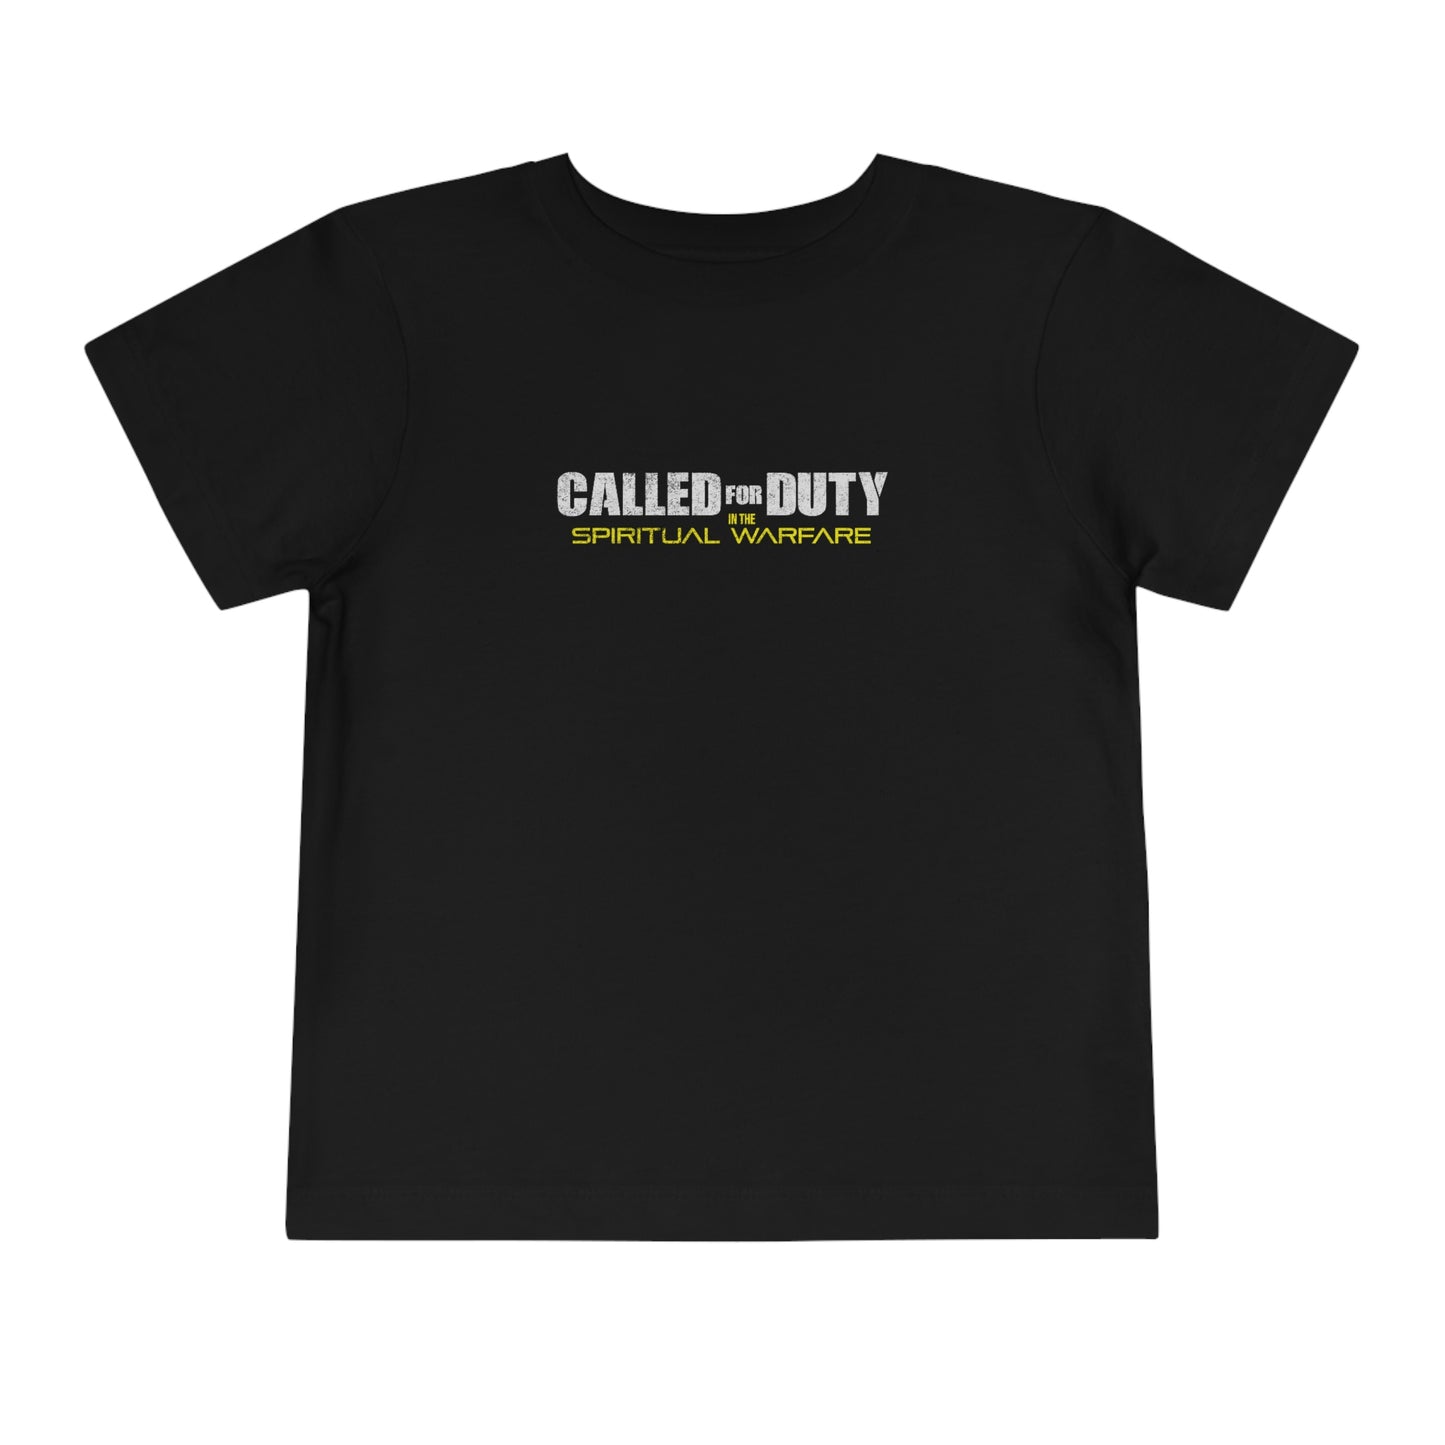 Called for Duty - Toddler Short Sleeve Tee